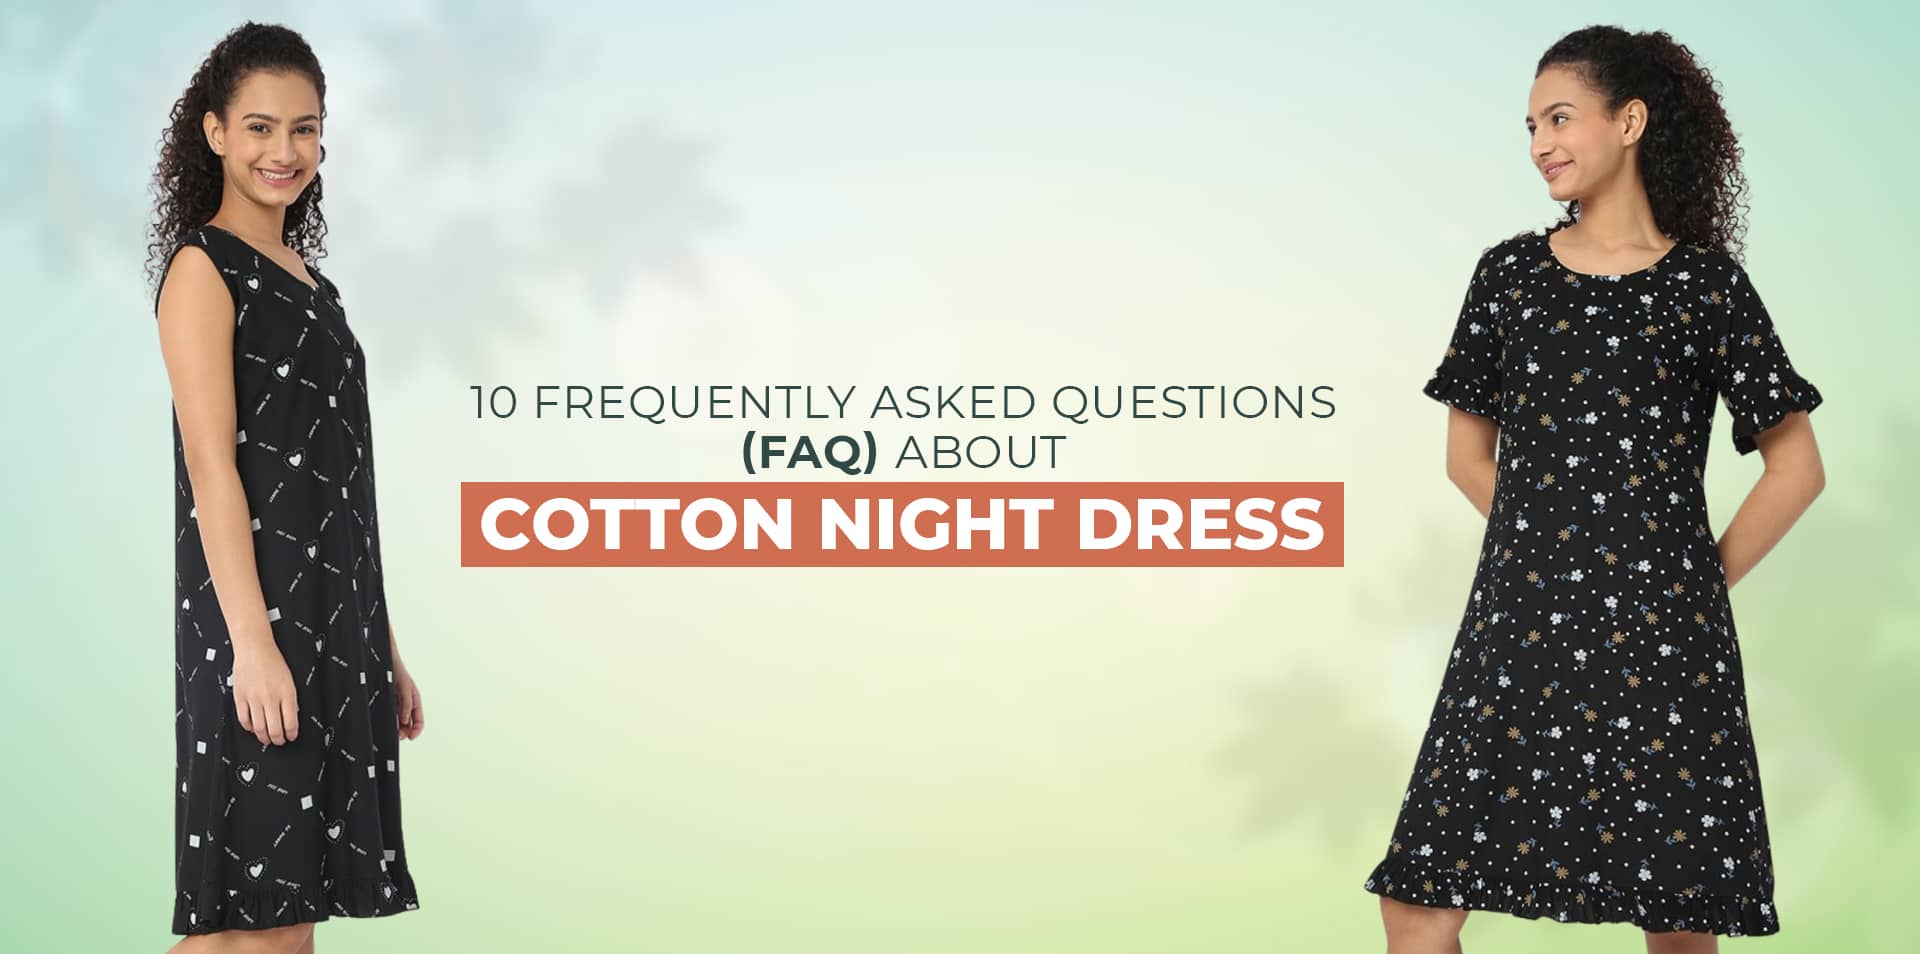 10 Frequently Asked Questions (FAQs) about Cotton Night Dress